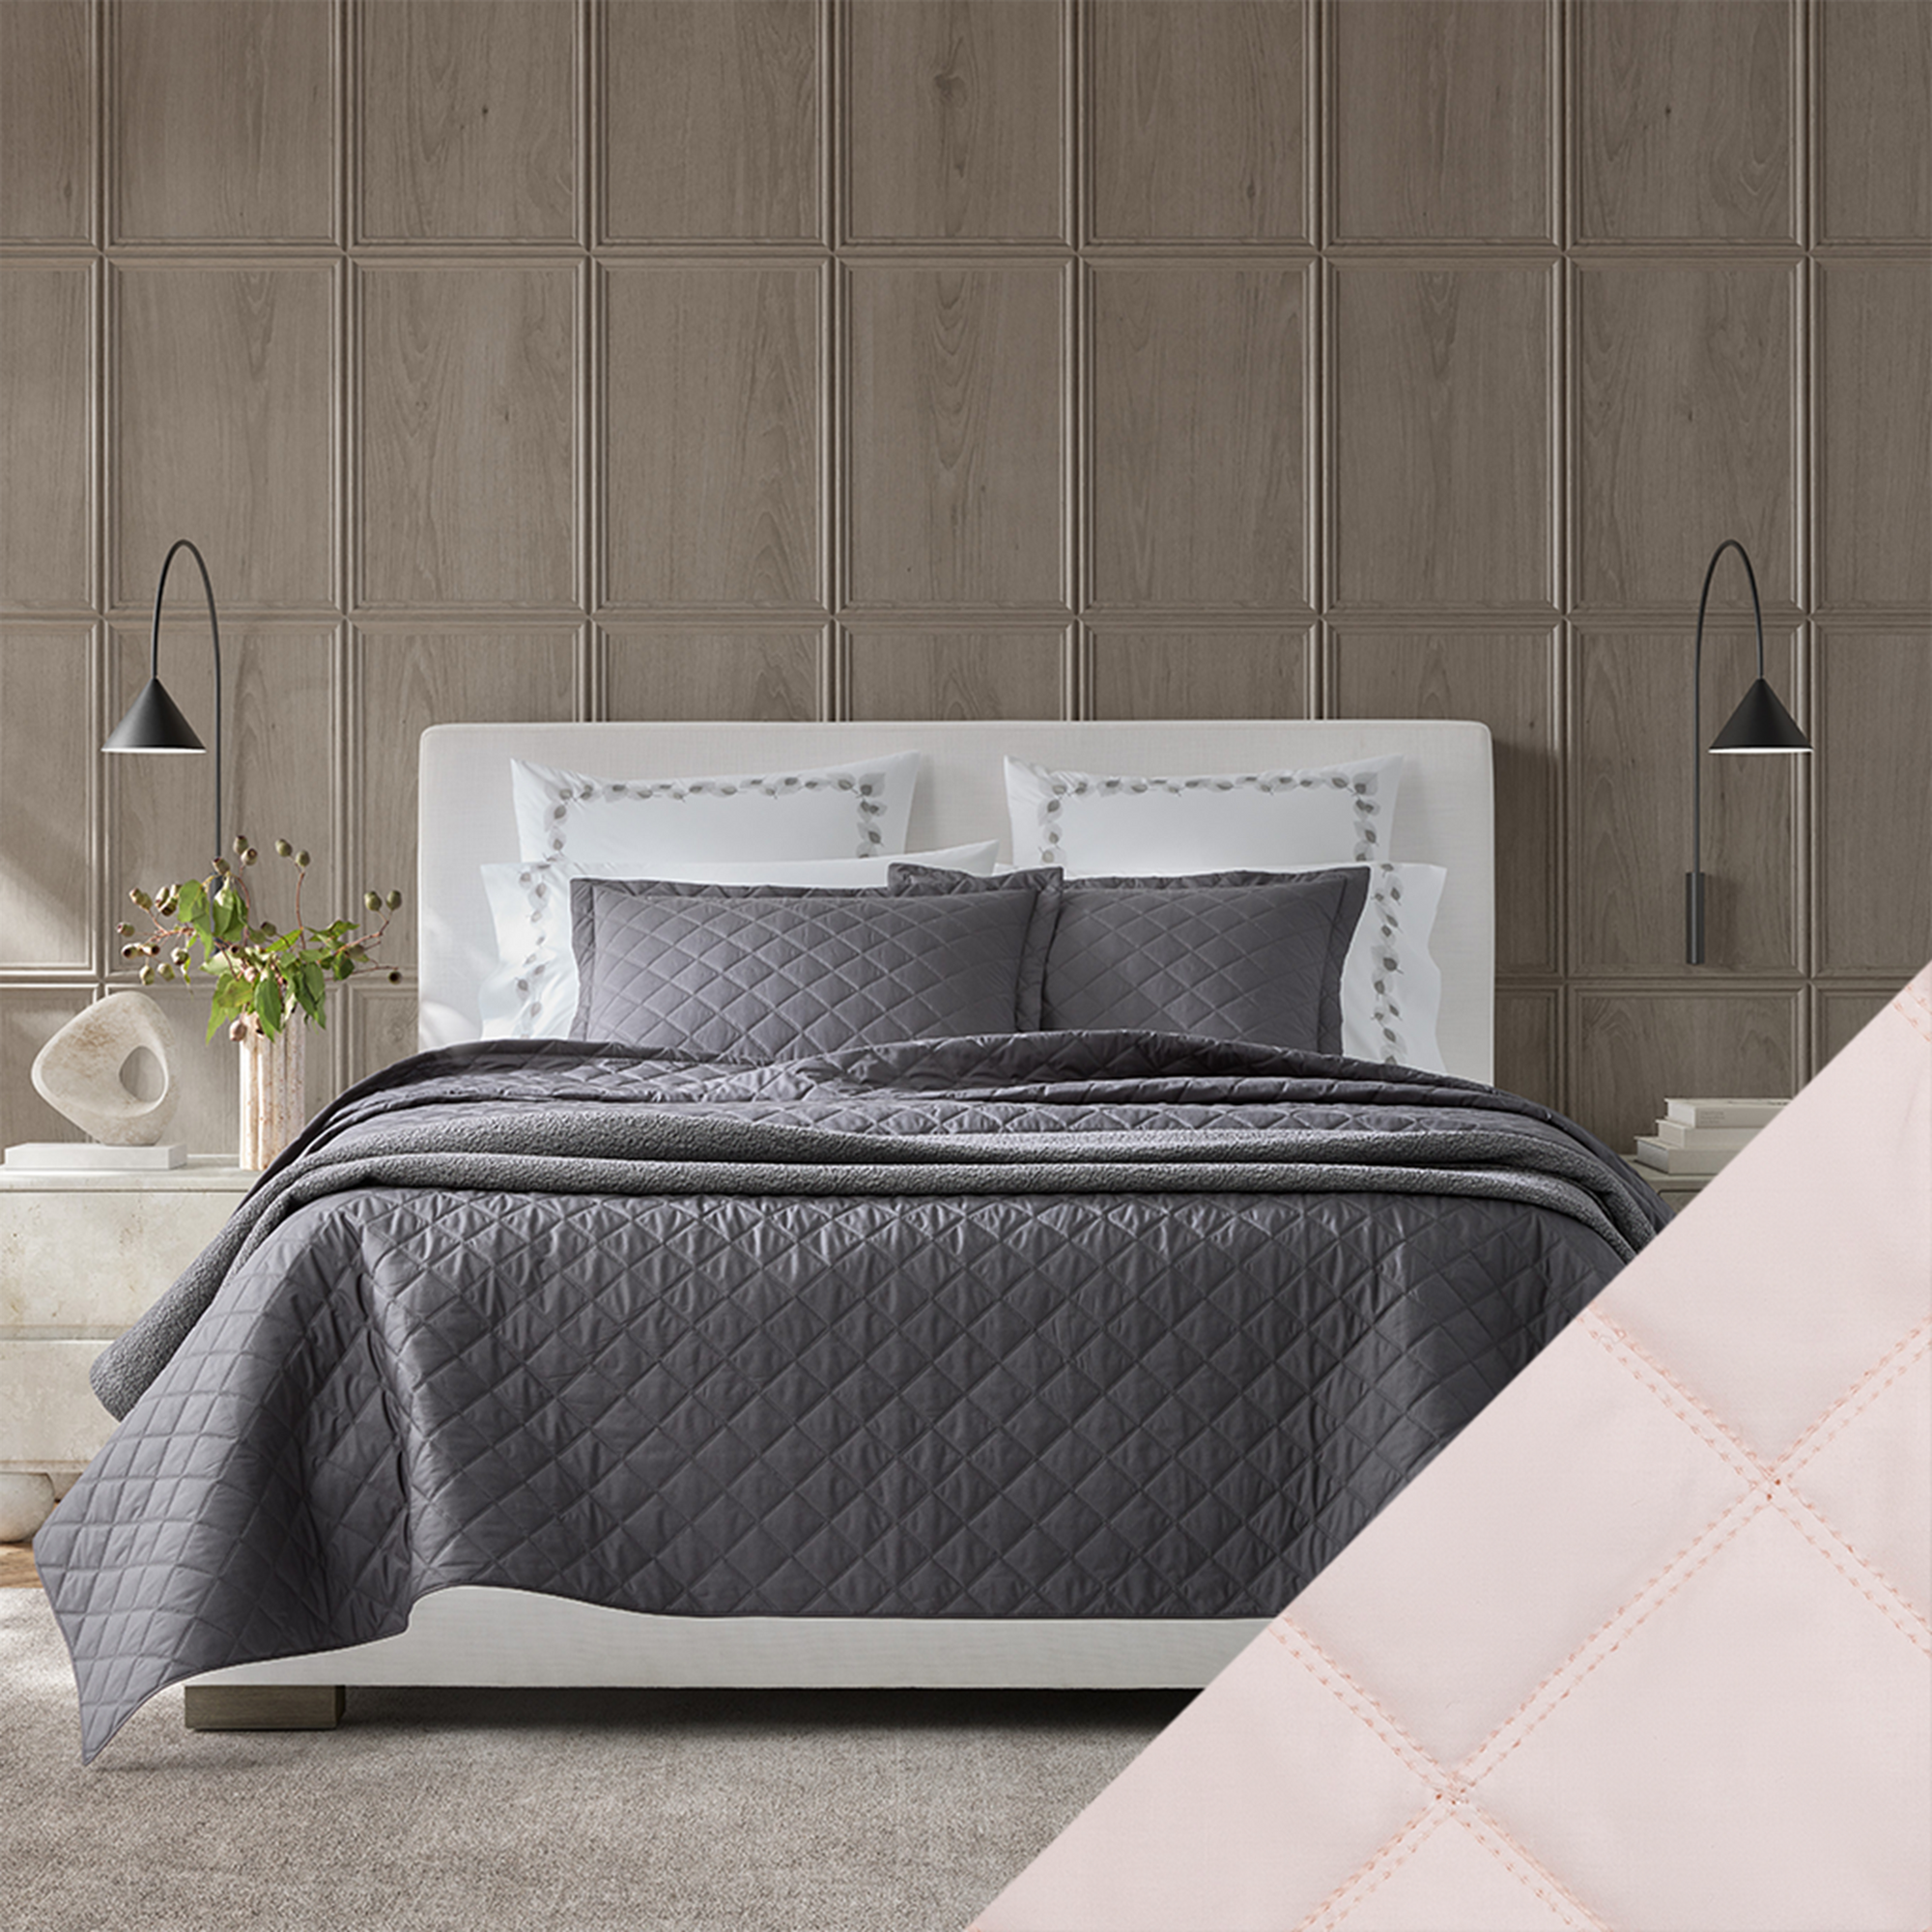 Bed Dressed in Matouk Milano Quilt Bedding with Swatch in Color Blush